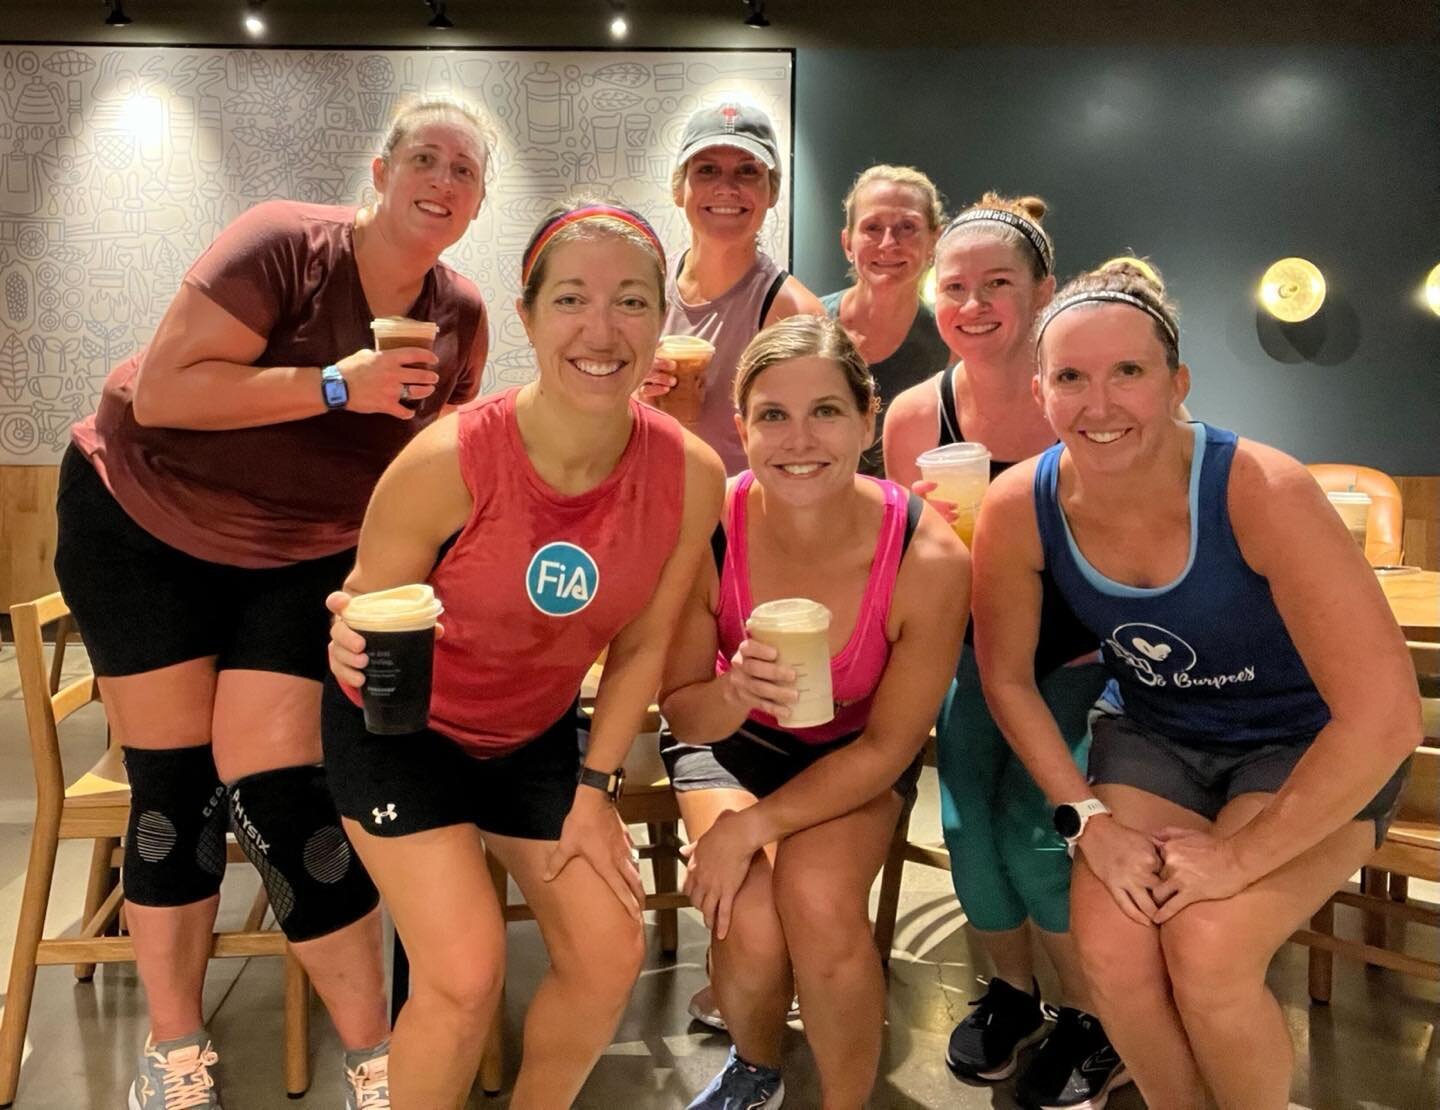 We had 7 PAX at the first official #starbird run! We had a great 4 mile run and tasty drinks after! Thanks @Cha Cha and @Cubbie for coming to support! Come join us next week!